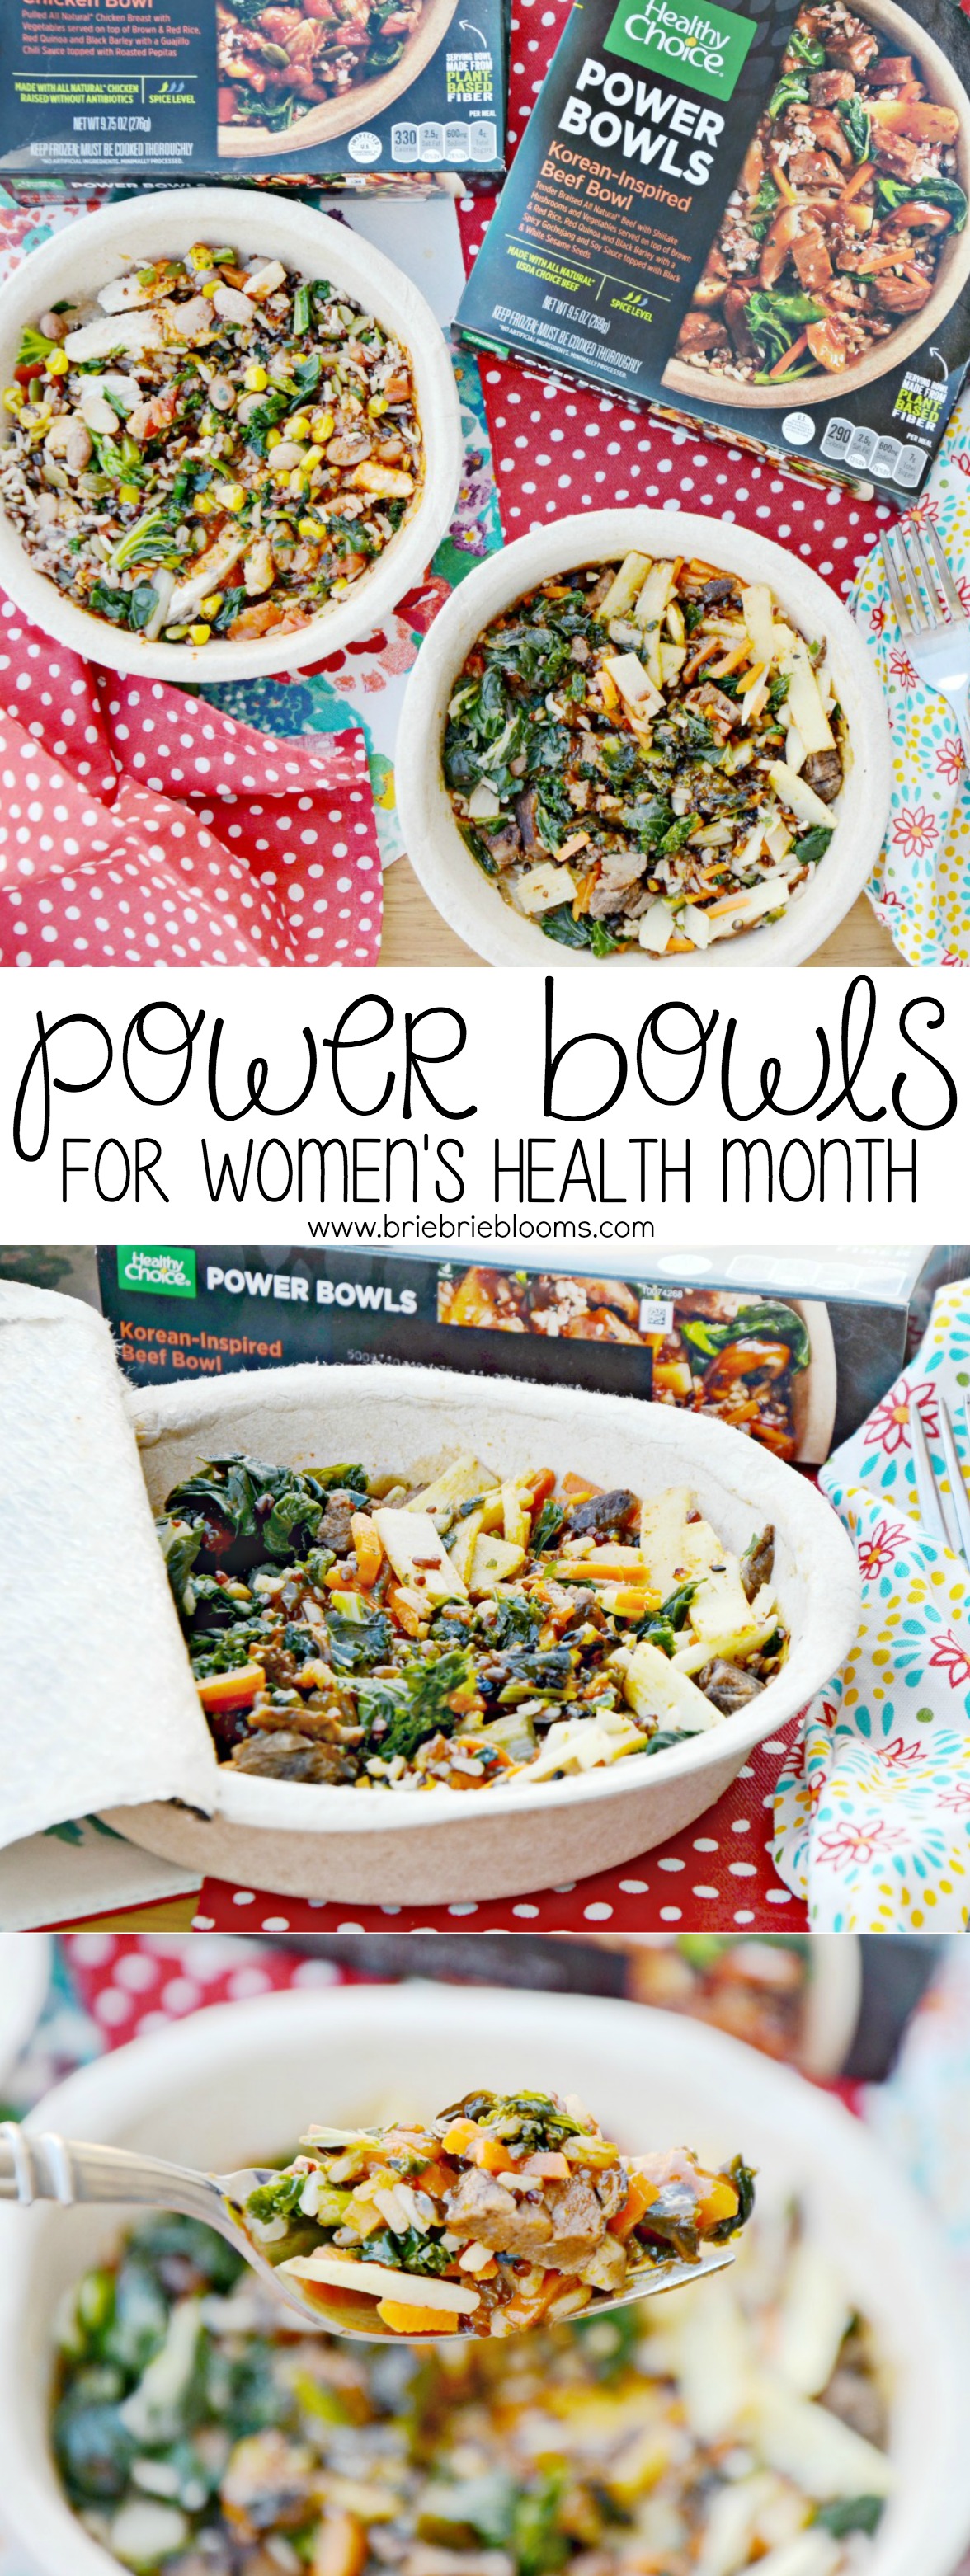 Healthy Choice Power Bowls provide all the ingredients that matter with the convenience of a fast frozen meal in a recycled plant based fiber serving bowl.